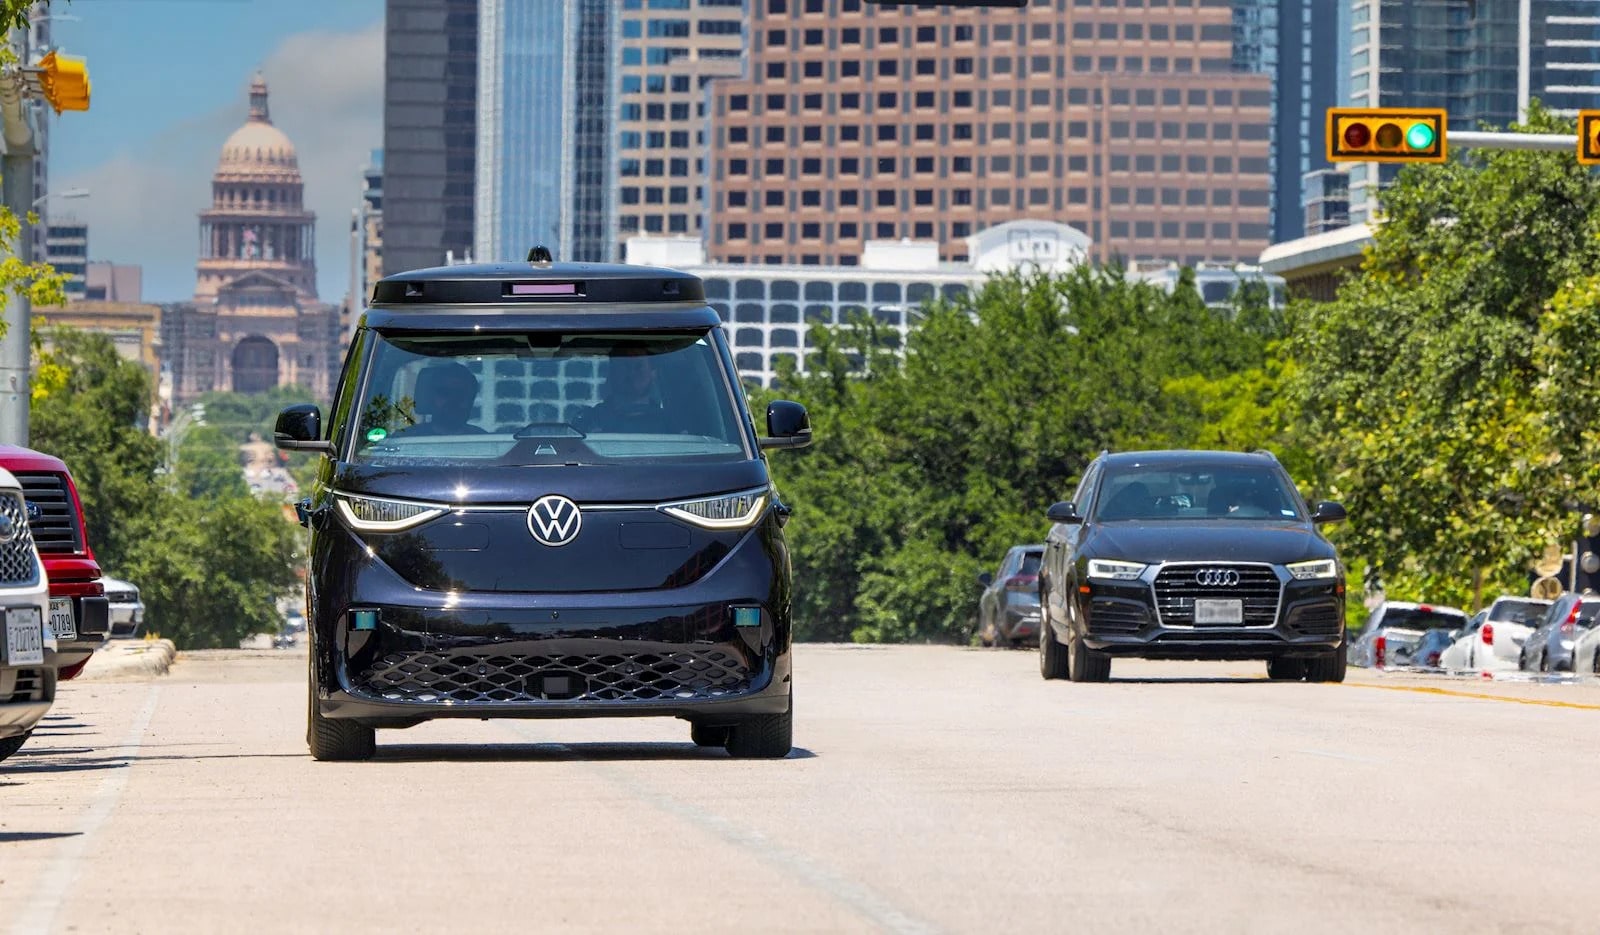 Volkswagen Launches Inaugural Autonomous Testing Program in the United States